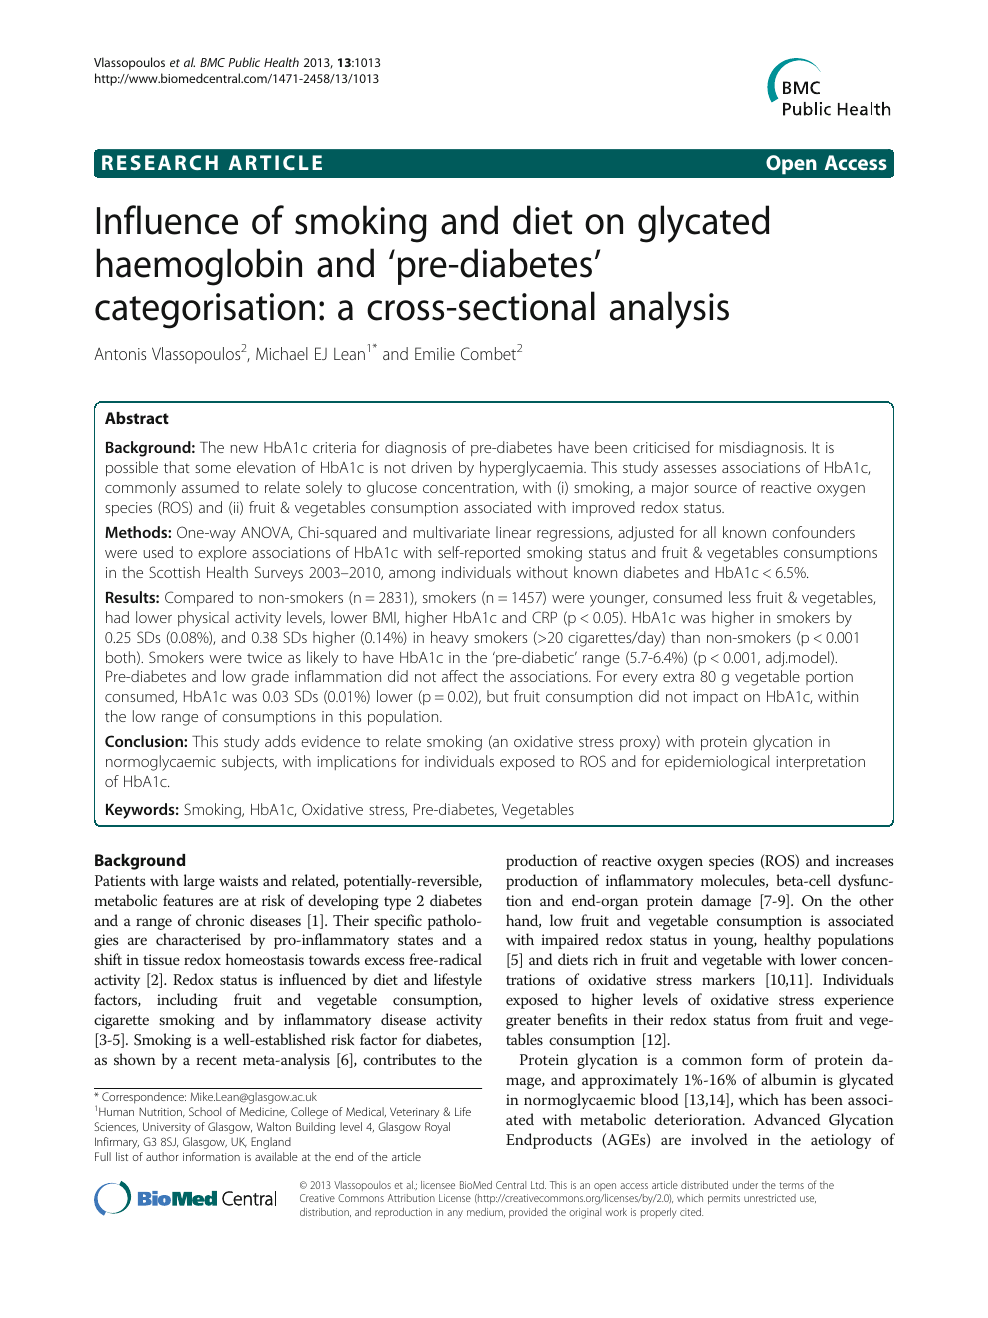 Influence Of Smoking And Diet On Glycated Haemoglobin And Pre Diabetes Categorisation A Cross Sectional Analysis Topic Of Research Paper In Health Sciences Download Scholarly Article Pdf And Read For Free On Cyberleninka